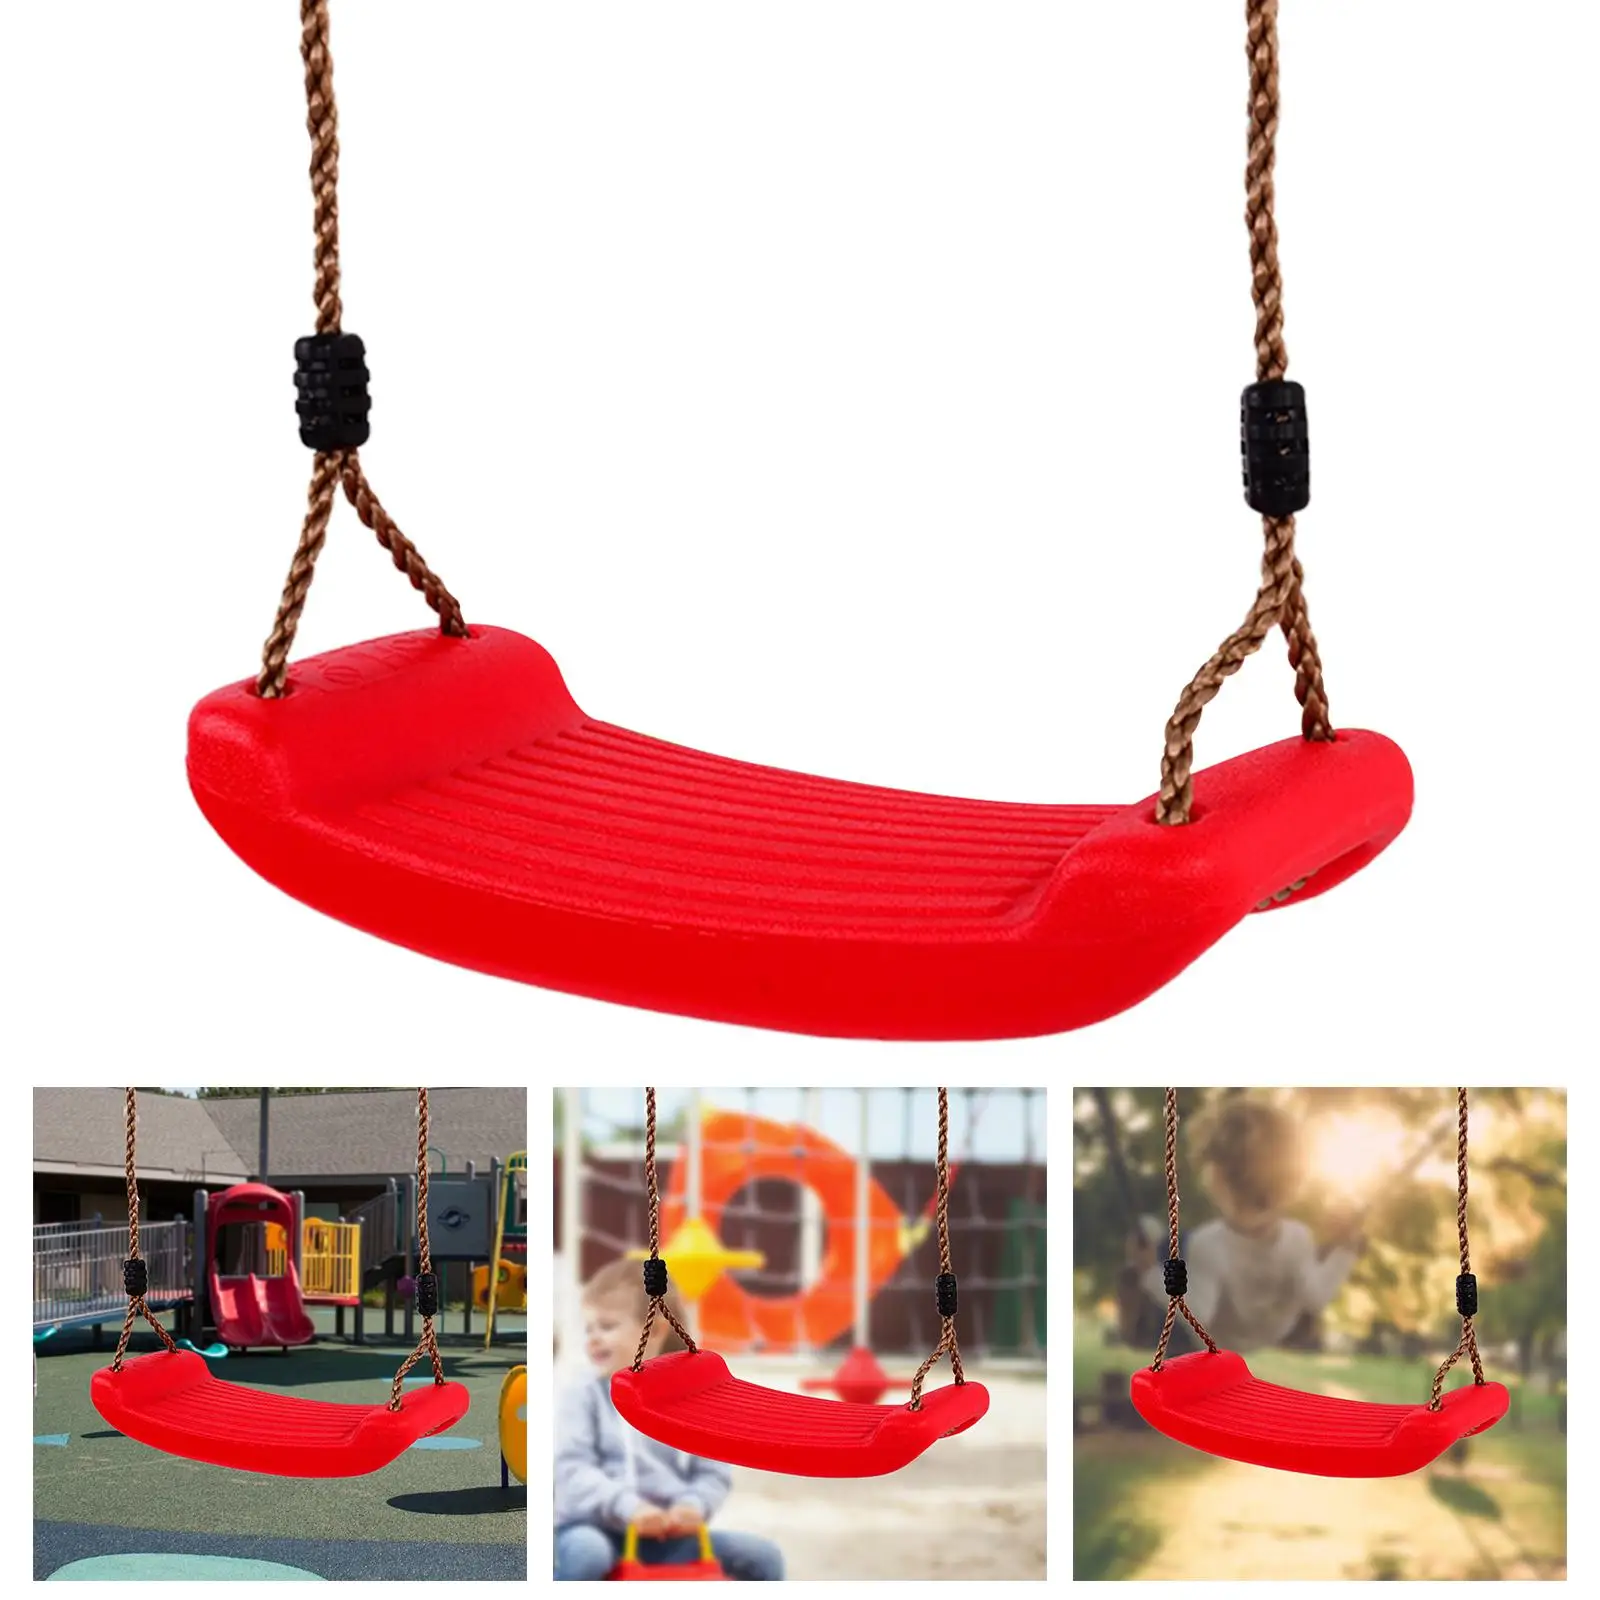 Indoor Outdoor Toys Curved Board Swing Chair Flying Toy Garden Swing Kids Hanging Seat Toys with Height Adjustable Ropes